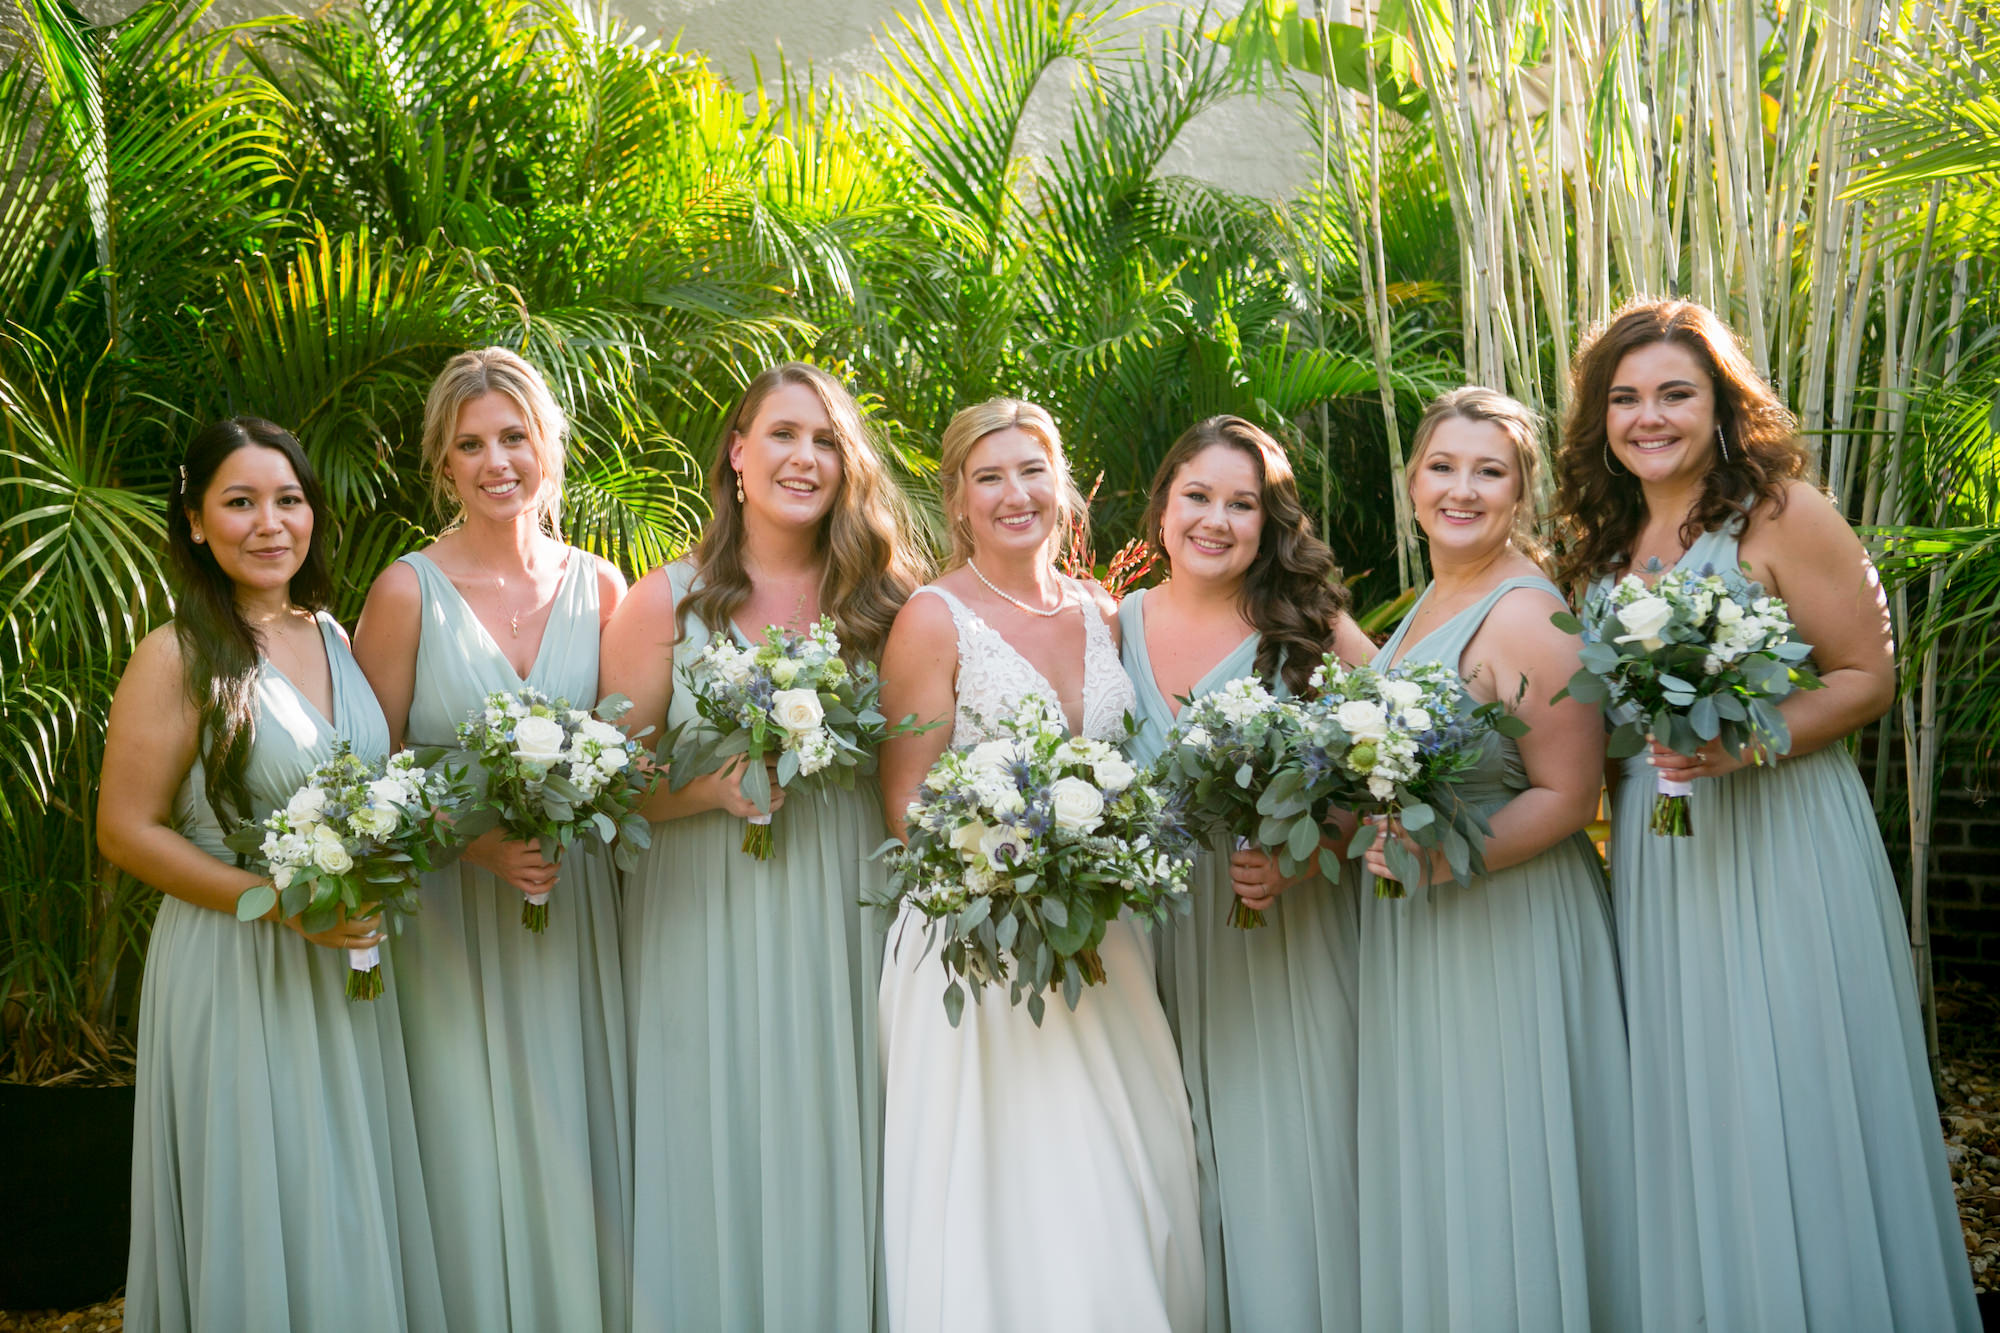 Sage Green Bridesmaids Dress Inspiration | White Roses and Eucalyptus Greenery Wedding Bouquets